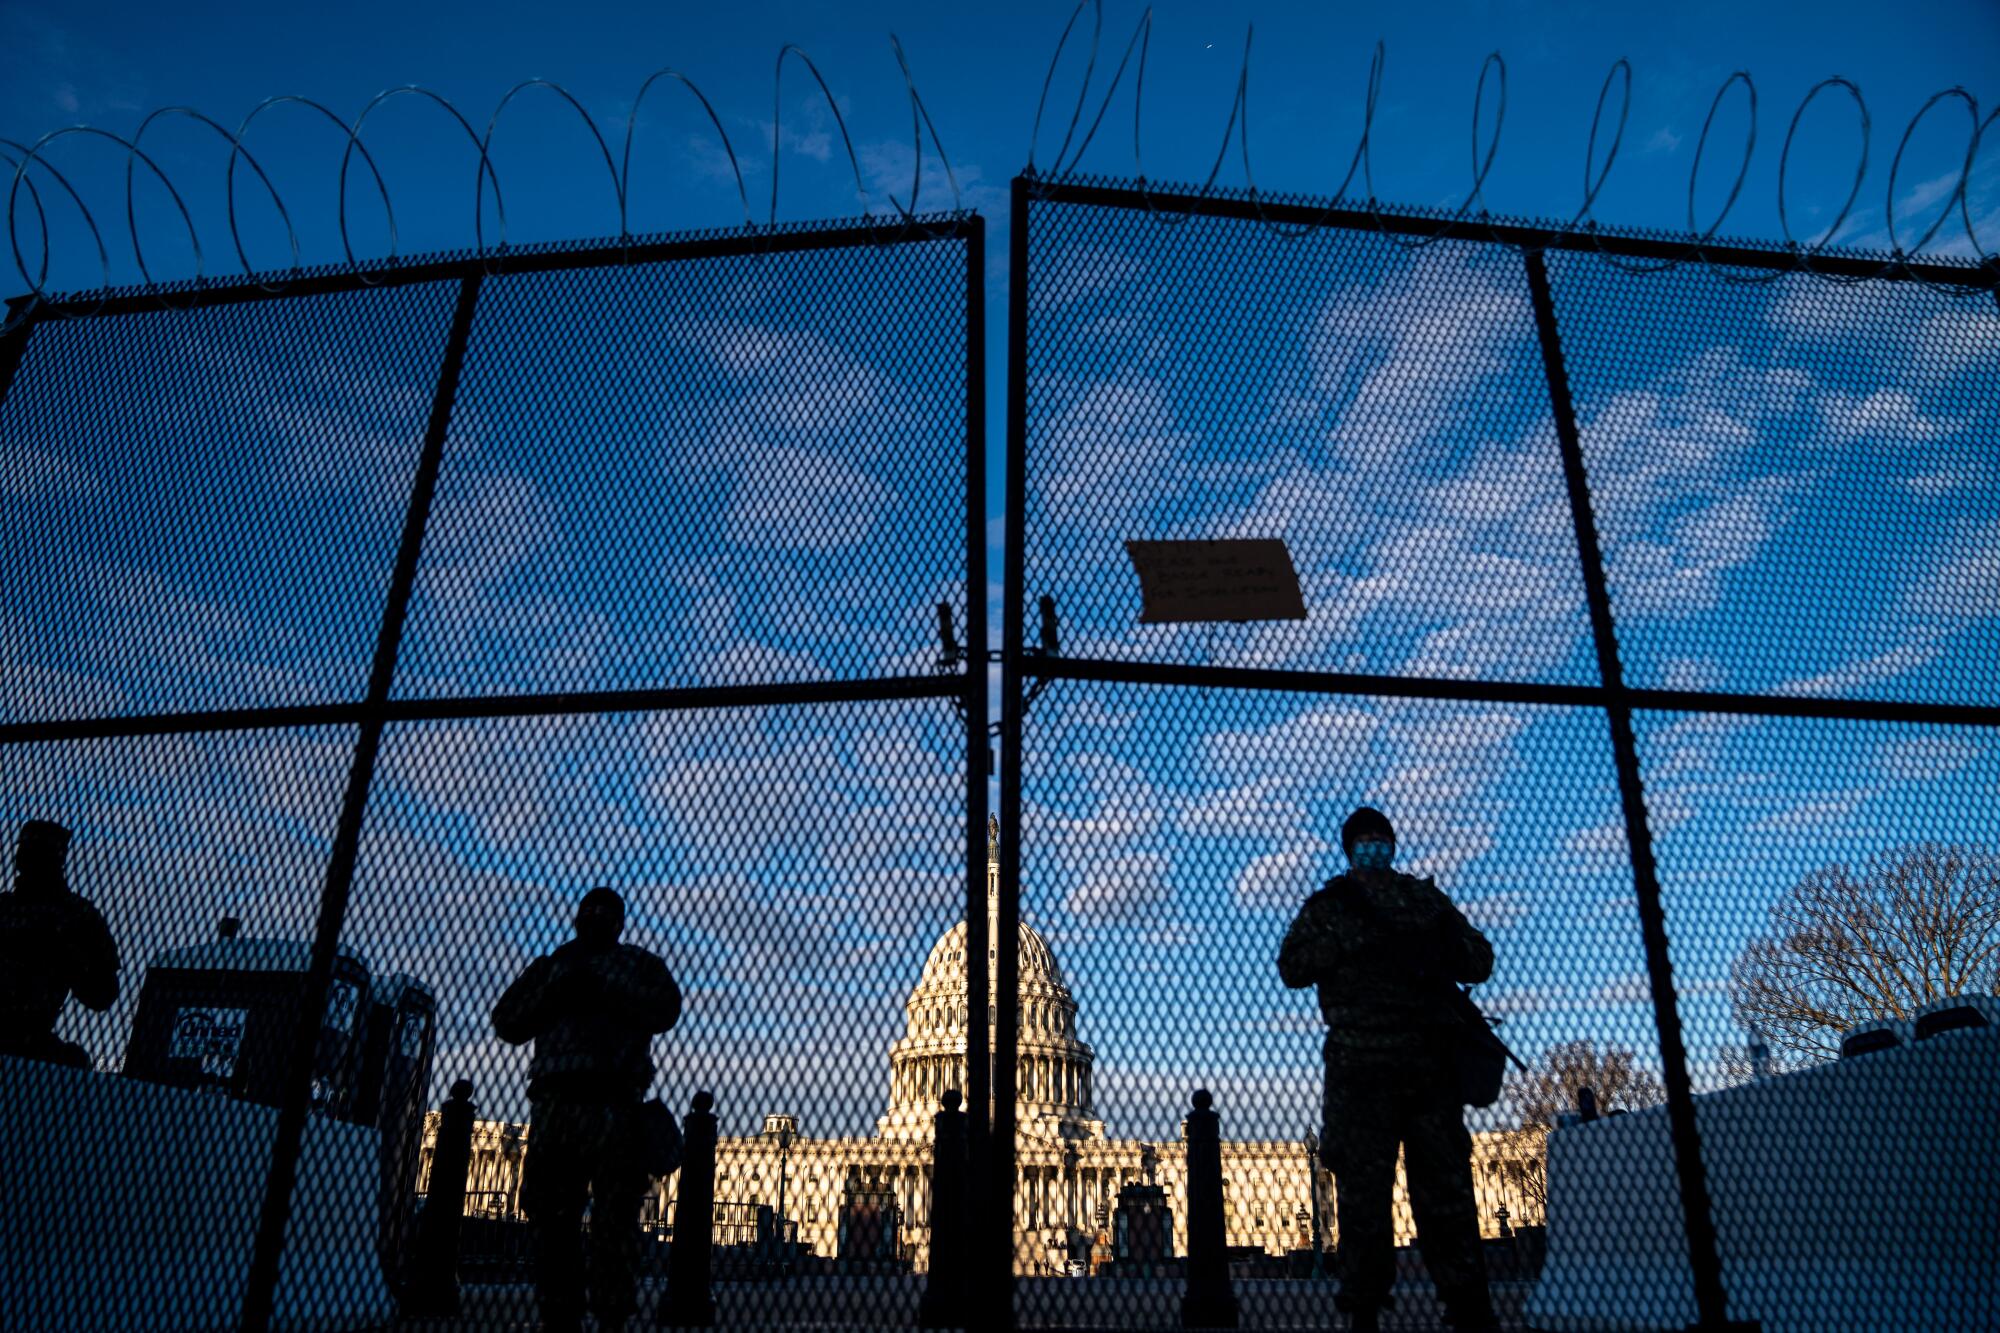 ational Guard troops stand behind security fencing with the dome of the U.S. Capitol Building behind them.